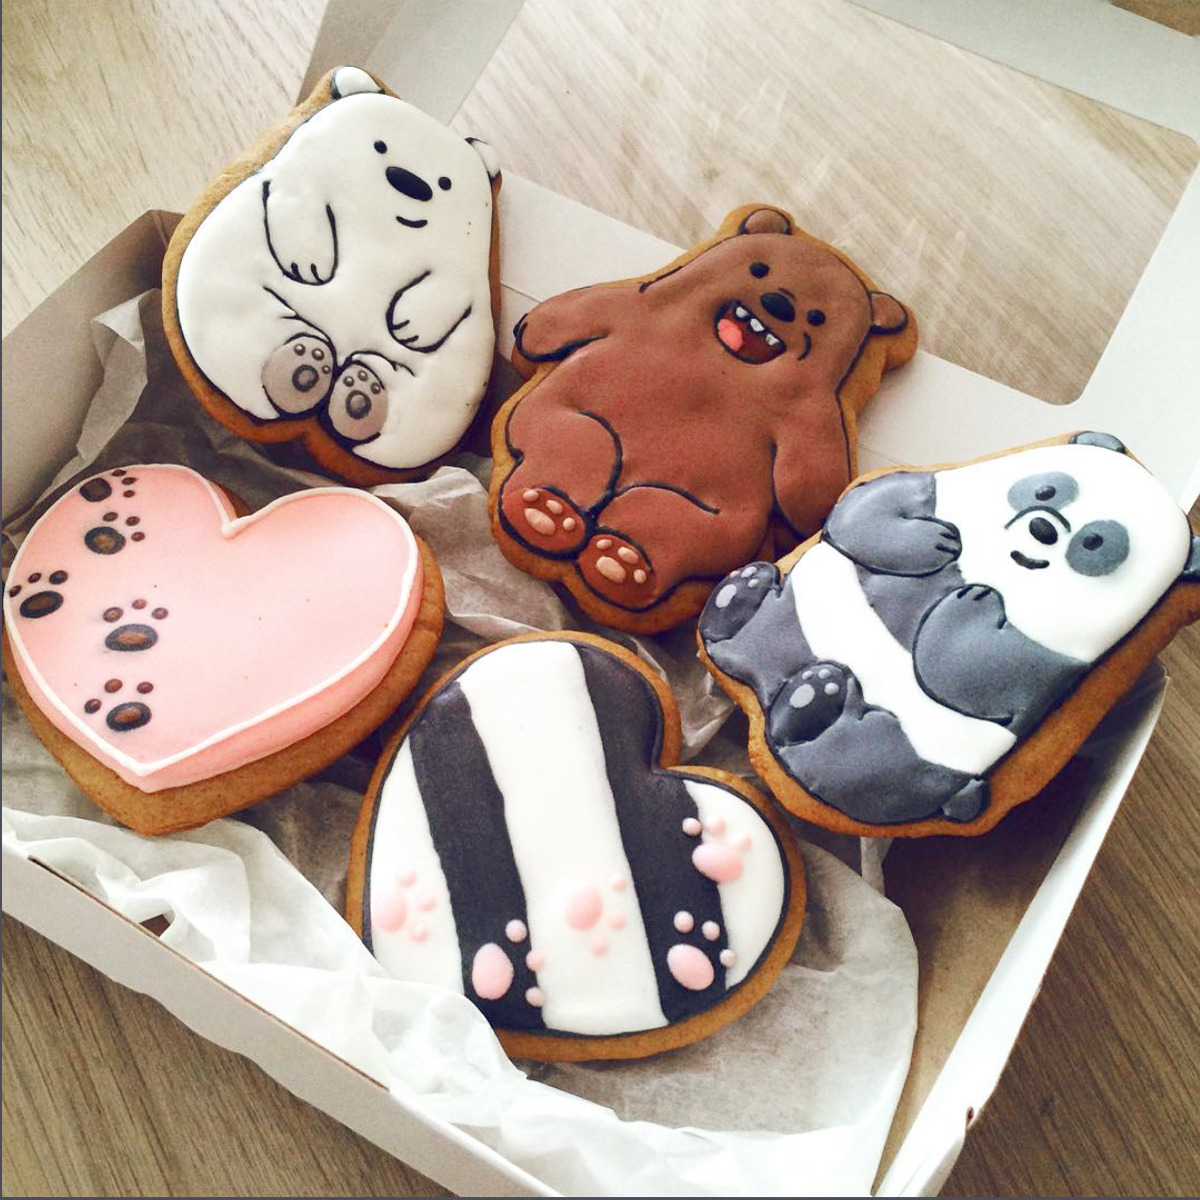 We Bare Bears cookies to start off a beary awesome weekend! Tag a friend you&rsquo;d